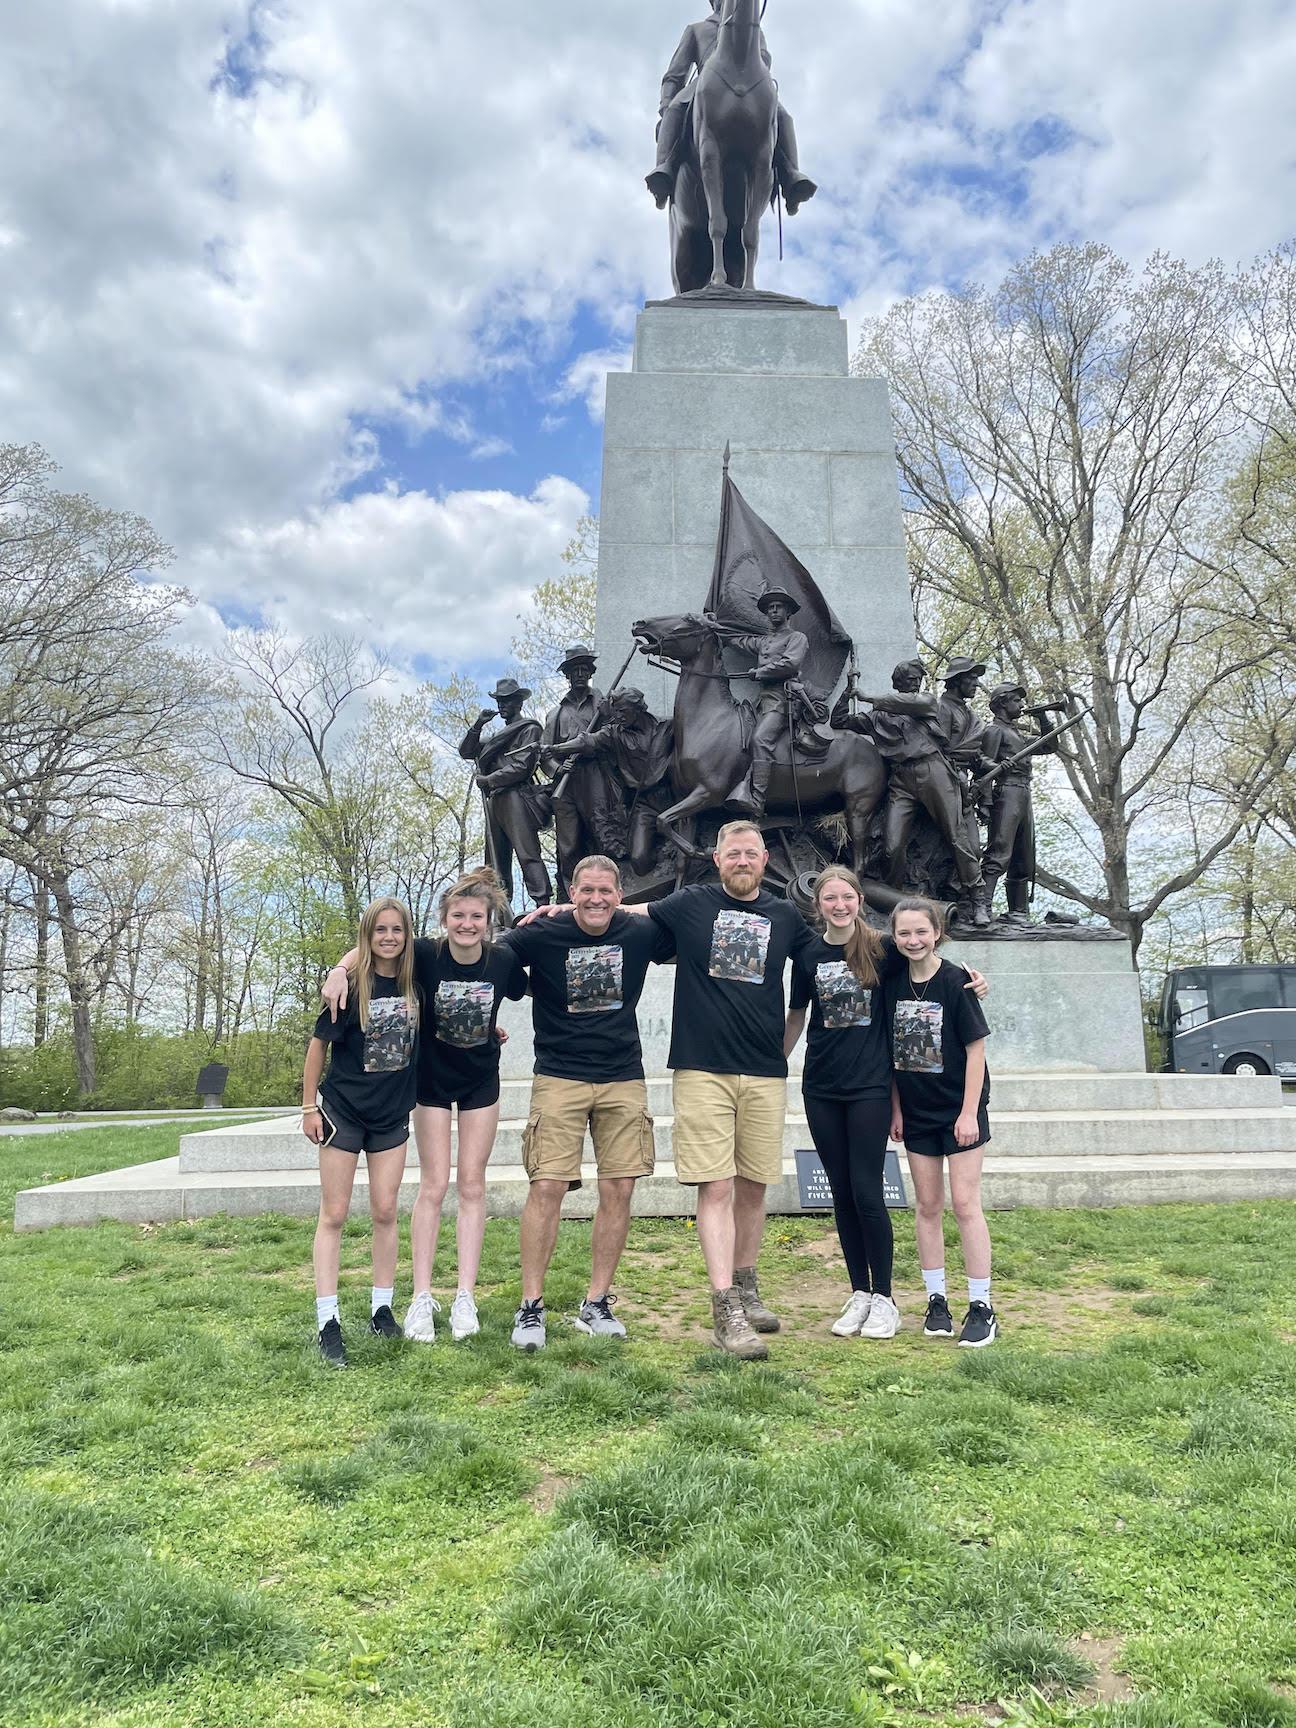 Ella Mains, Isabella Naglich, Mr. Waszo, Mr. Weir, Gabriella Naglich, and Amber Hackenberg pause for a photo at the Virginia Monument